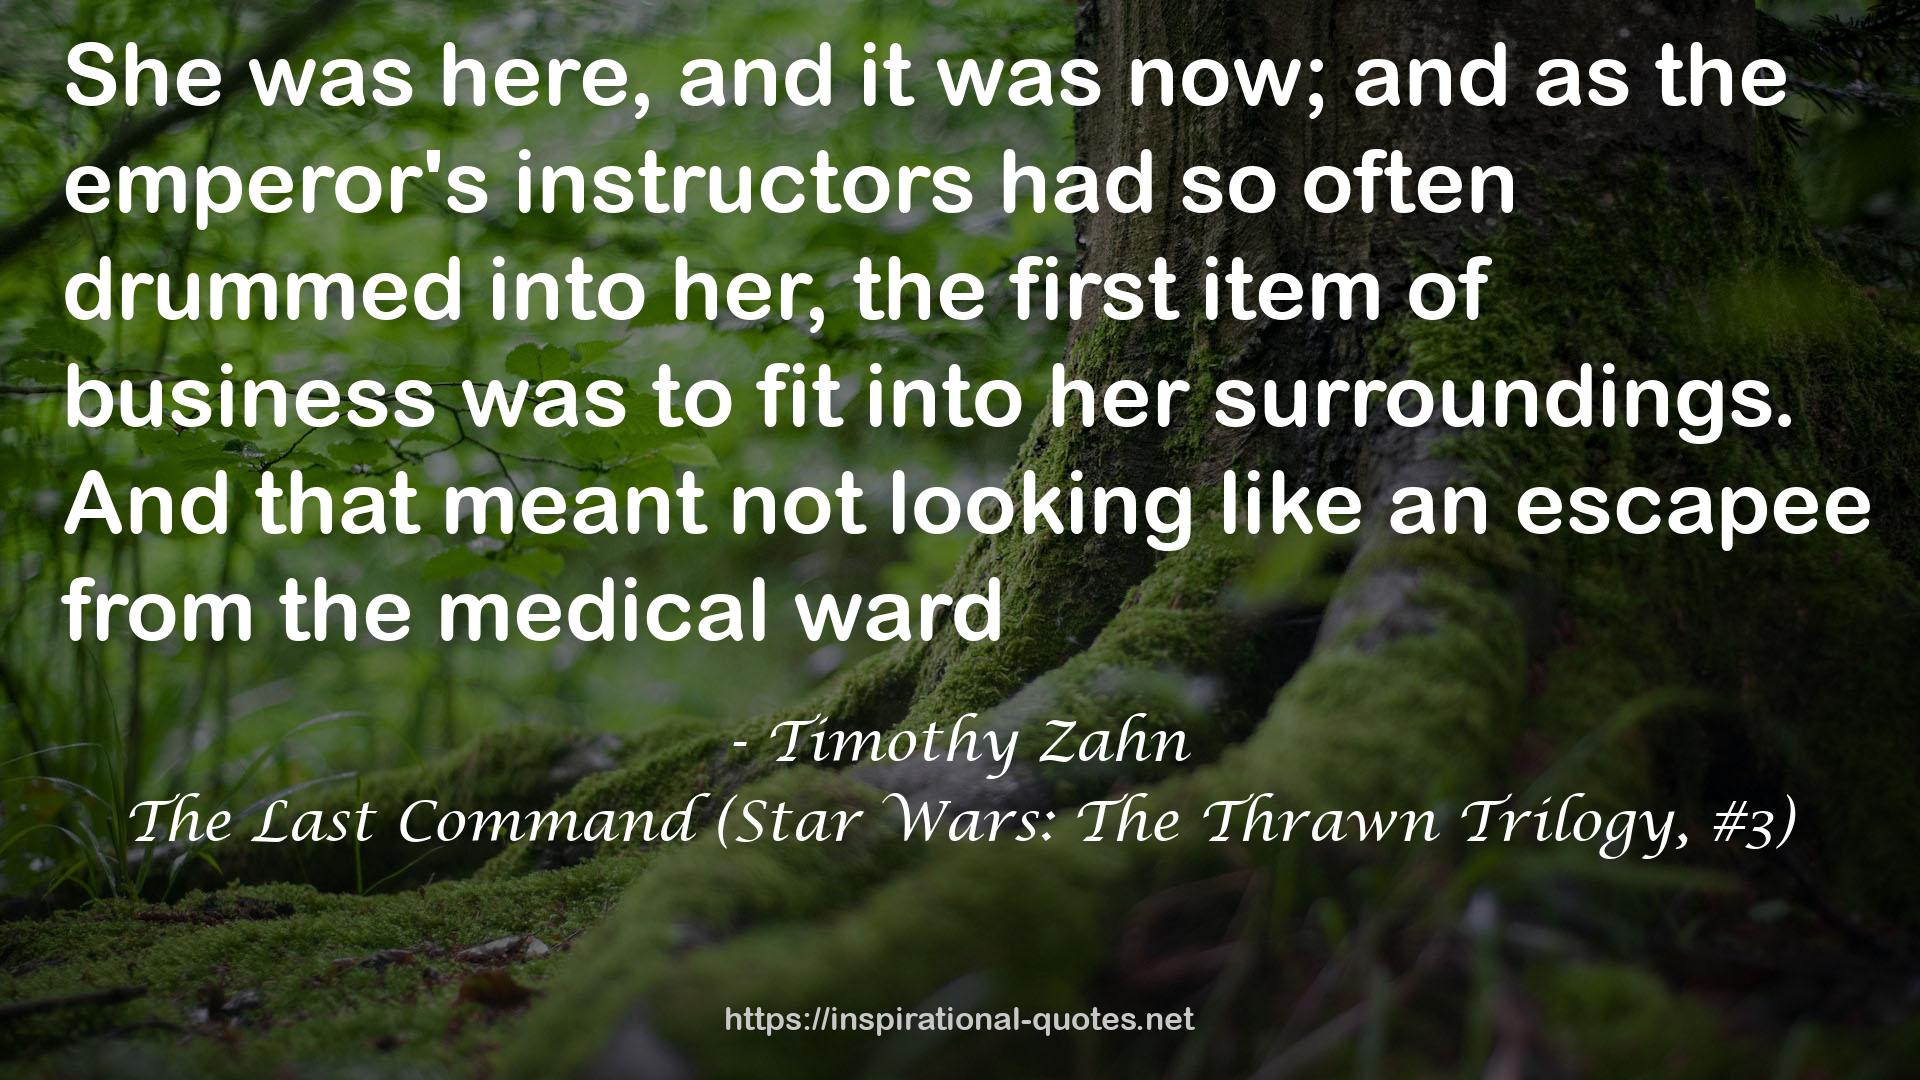 The Last Command (Star Wars: The Thrawn Trilogy, #3) QUOTES